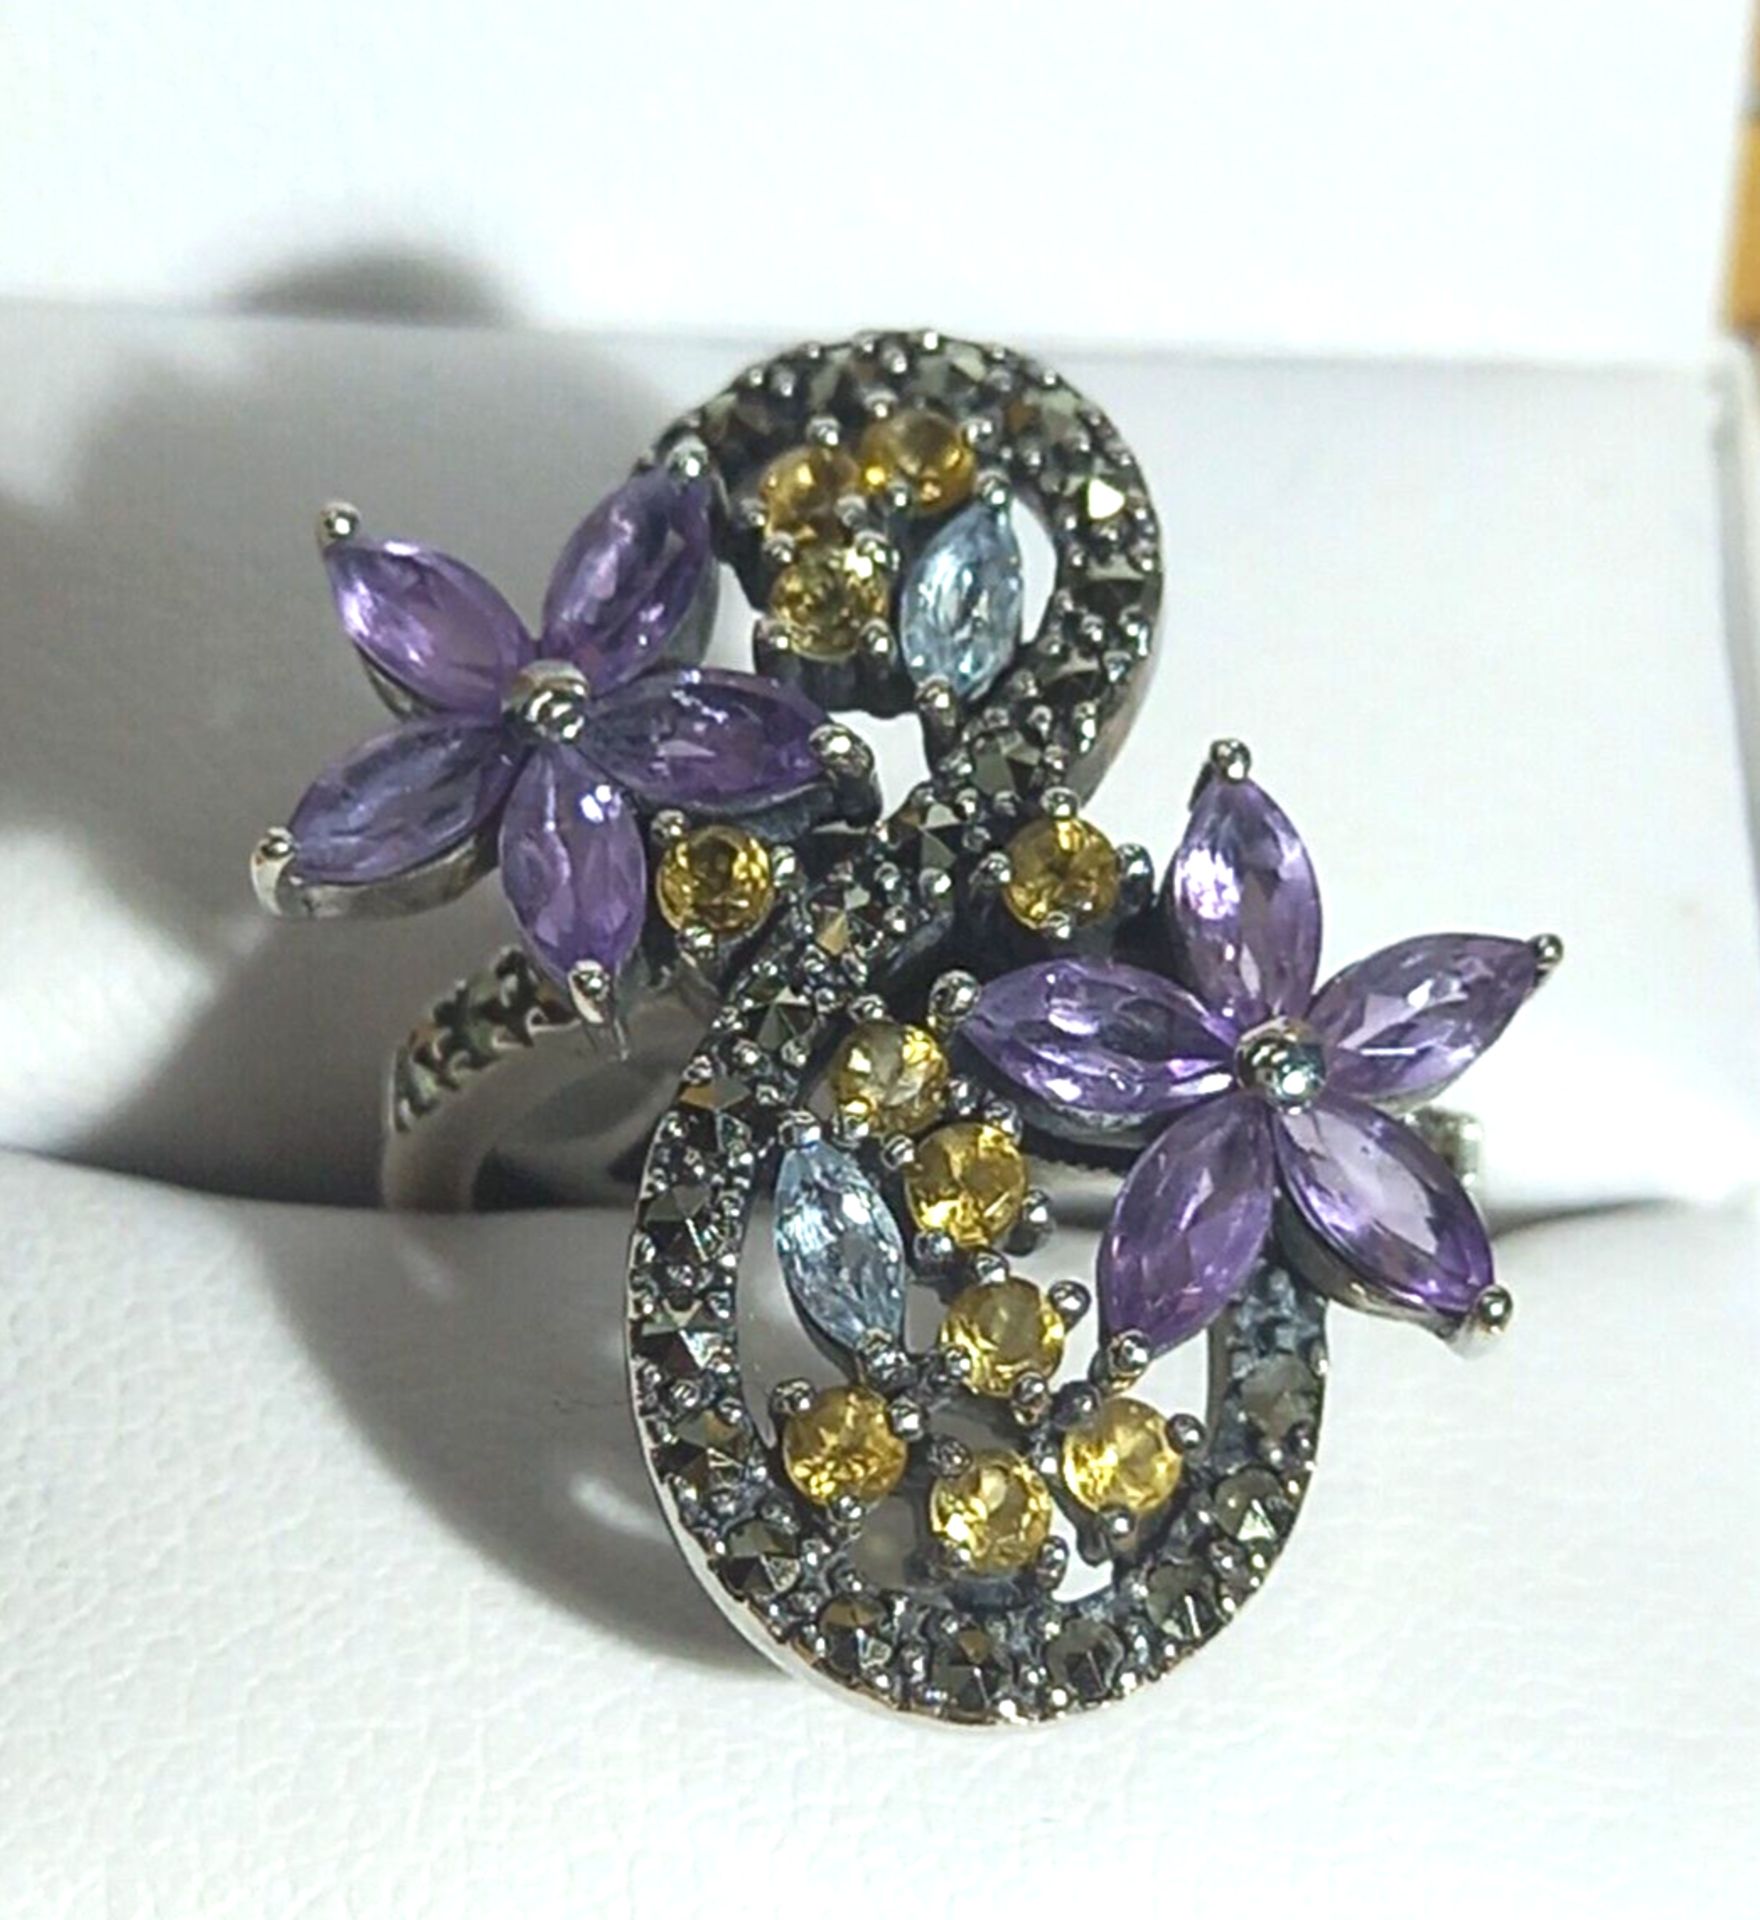 SILVER DRESS RING WITH SEMI PRECIOUS STONES - Image 3 of 6